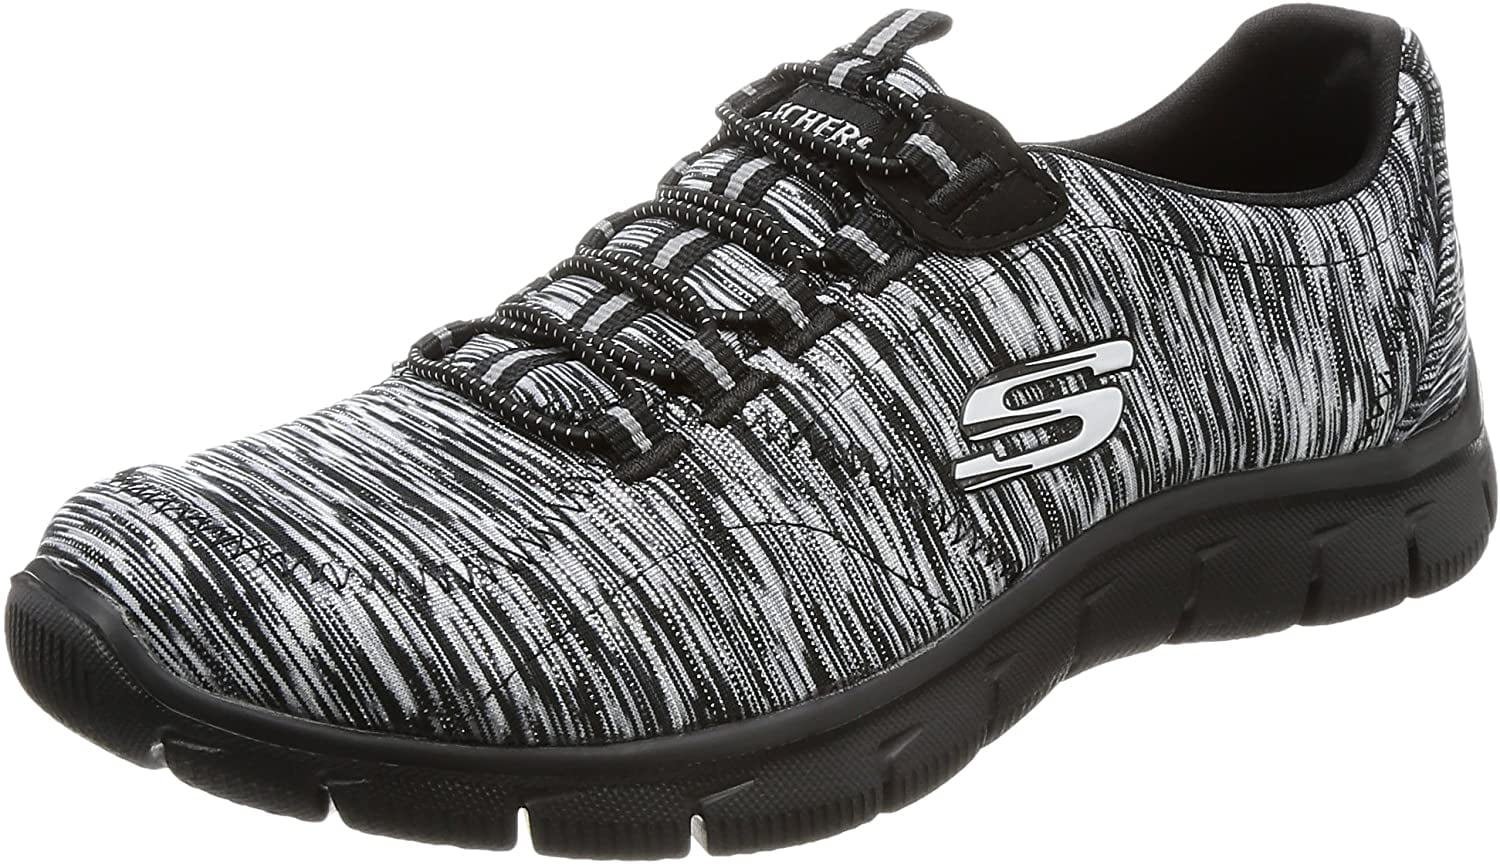 skechers relaxed fit empire rock around